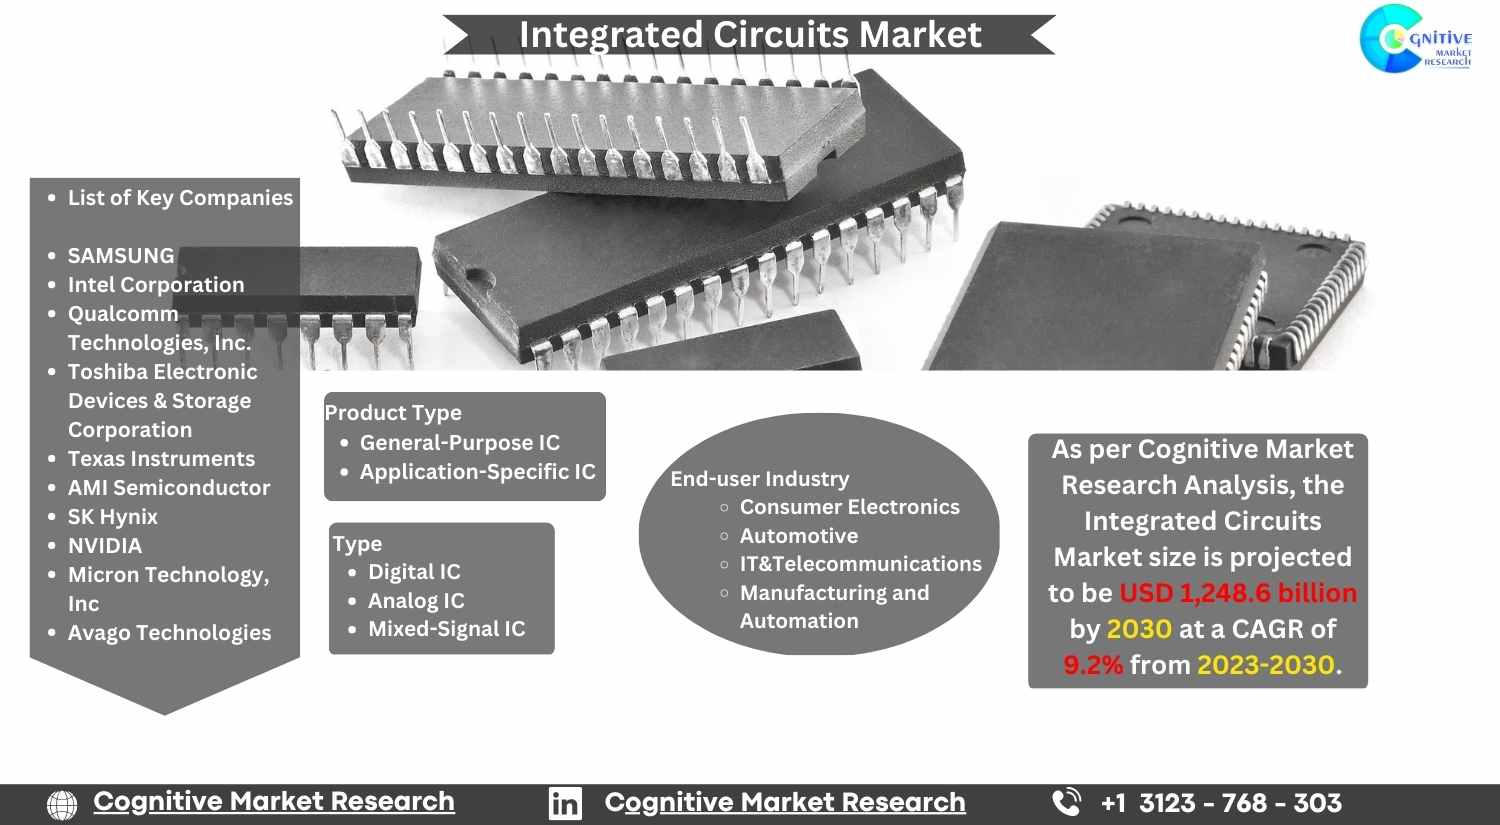 Integrated Circuits Market to Reach USD 1,248.6 Billion by 2030